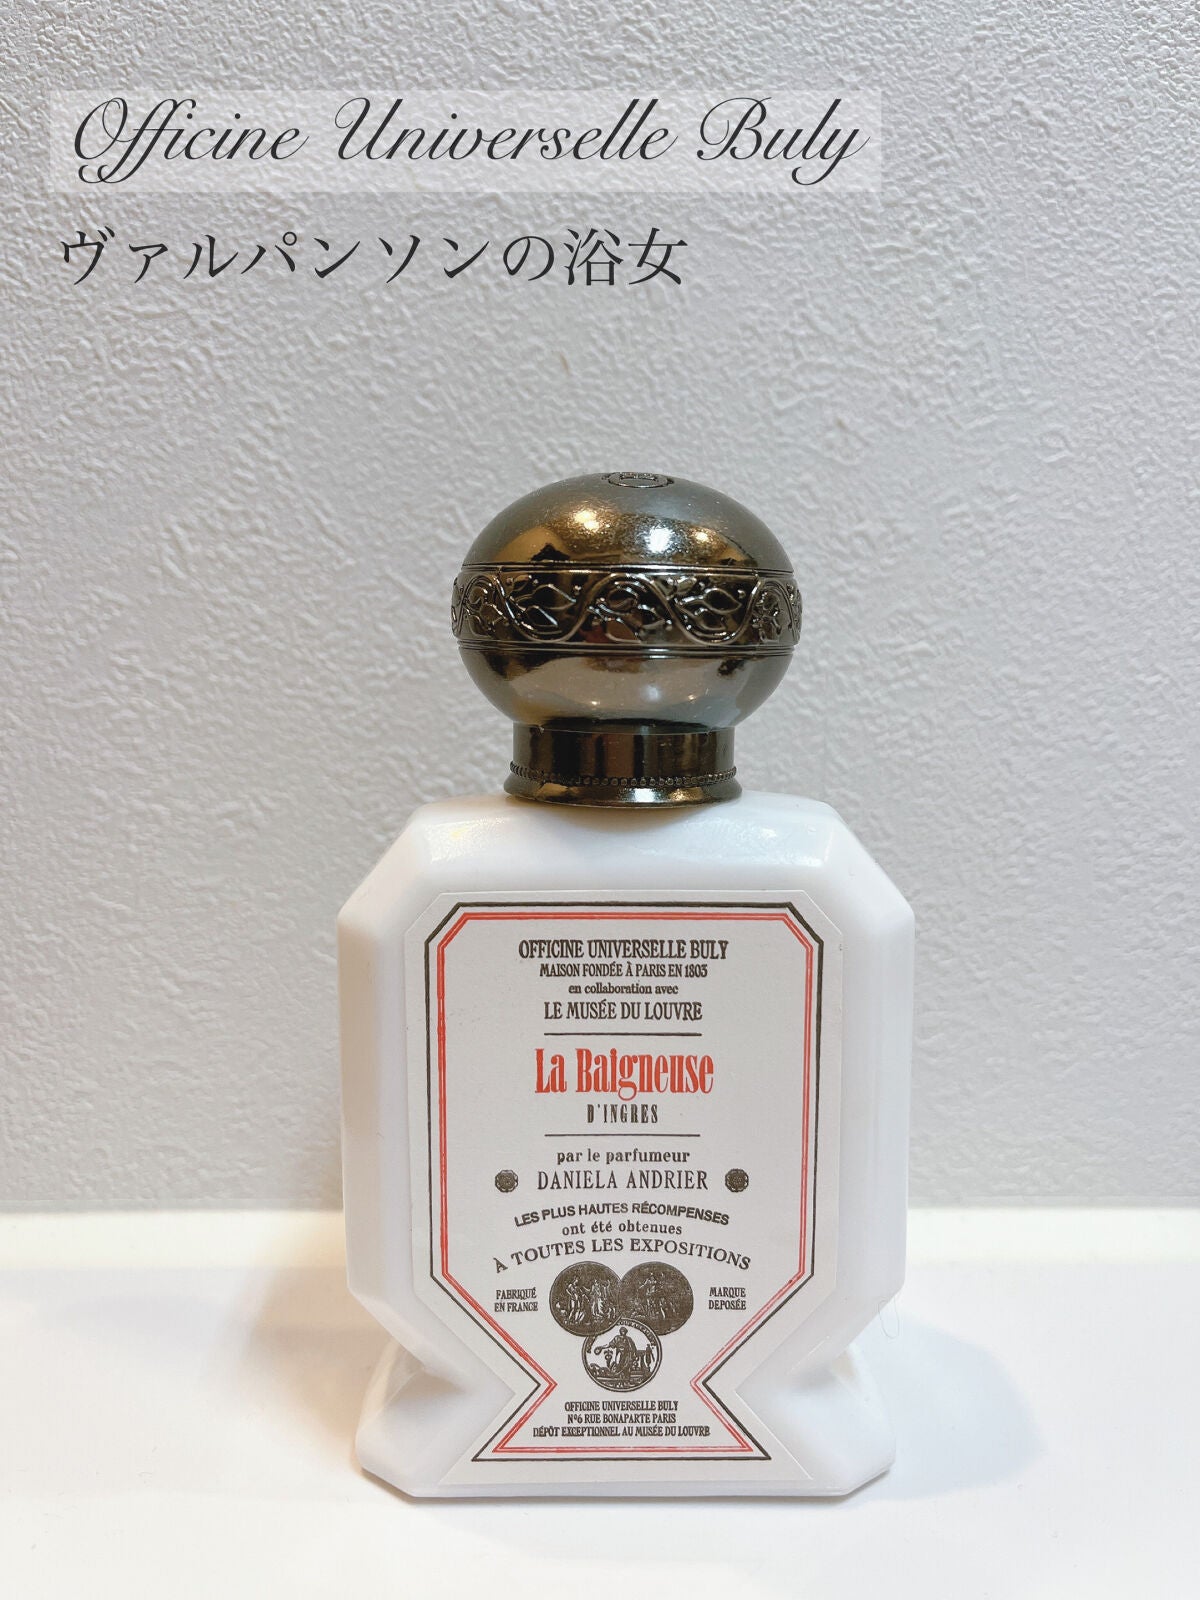 OFFICINE UNIVERSELLE BULY  水性香水 12種